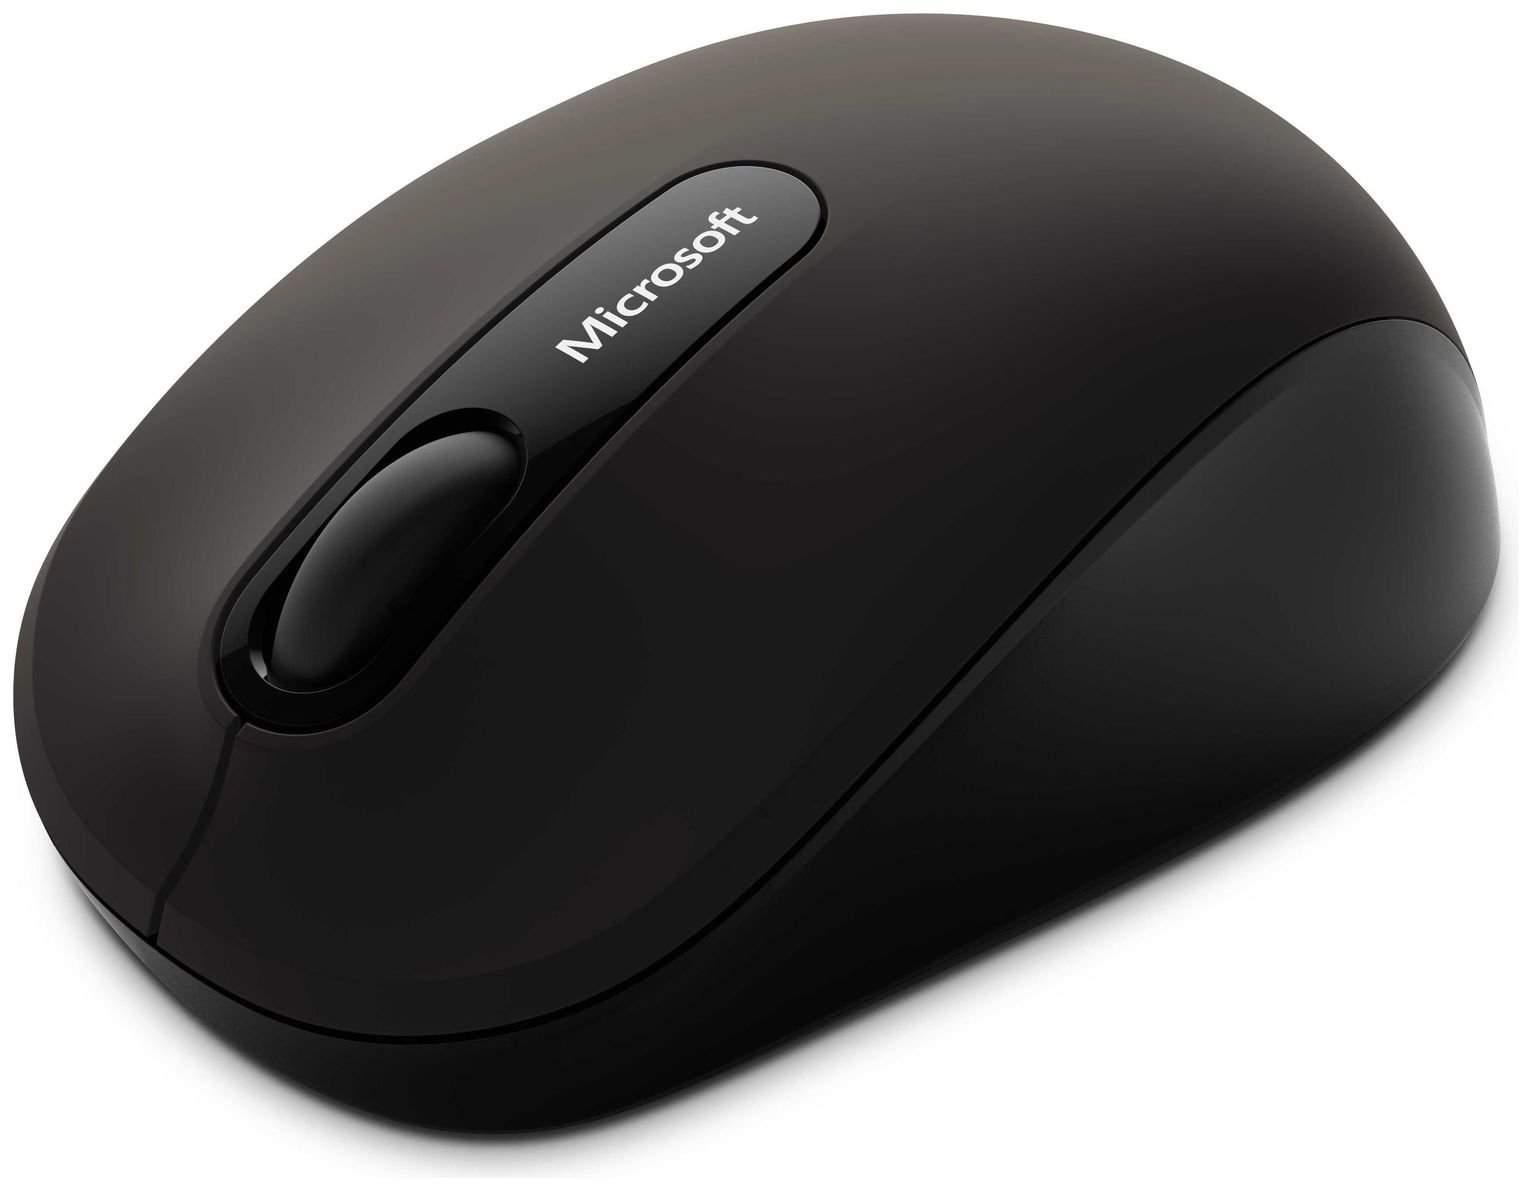 Microsoft 3600 Bluetooth Wireless Mouse Review